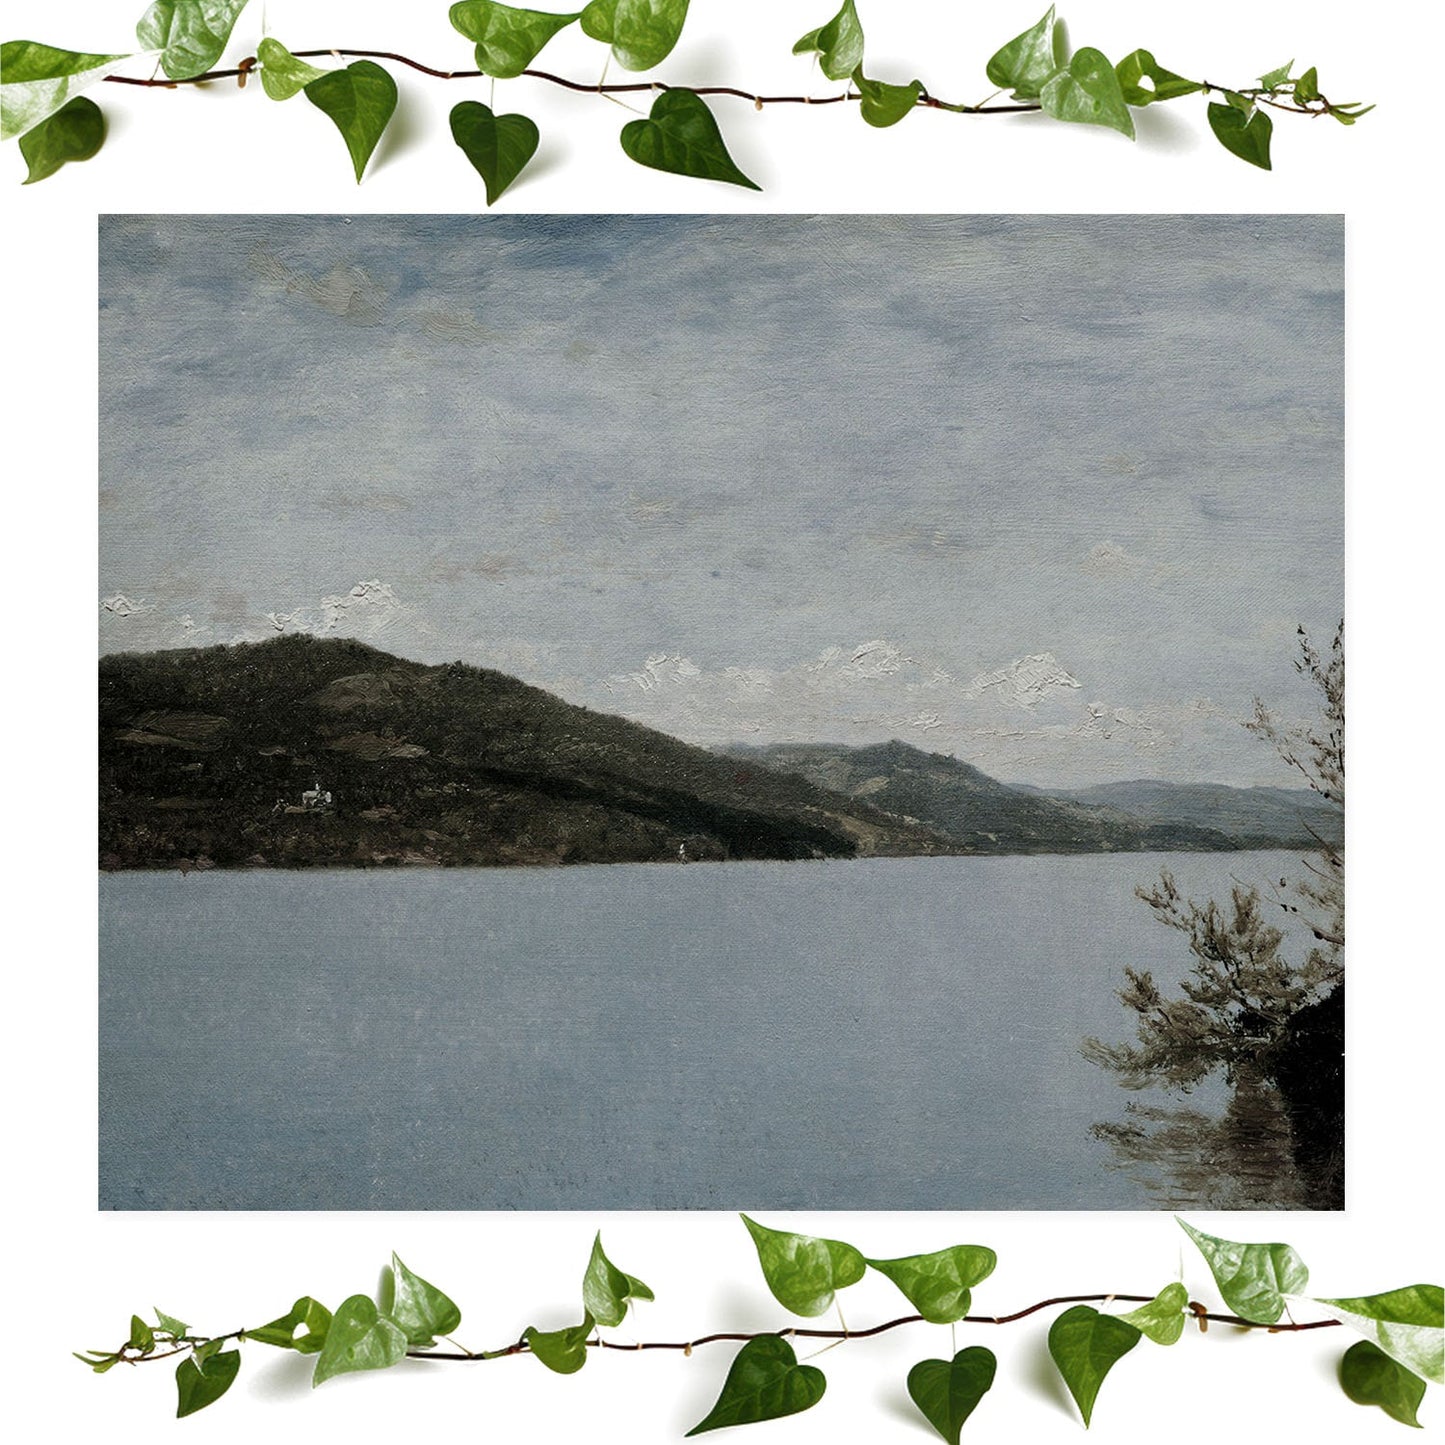 Minimalist Landscape art prints featuring a blue and green, vintage wall art room decor